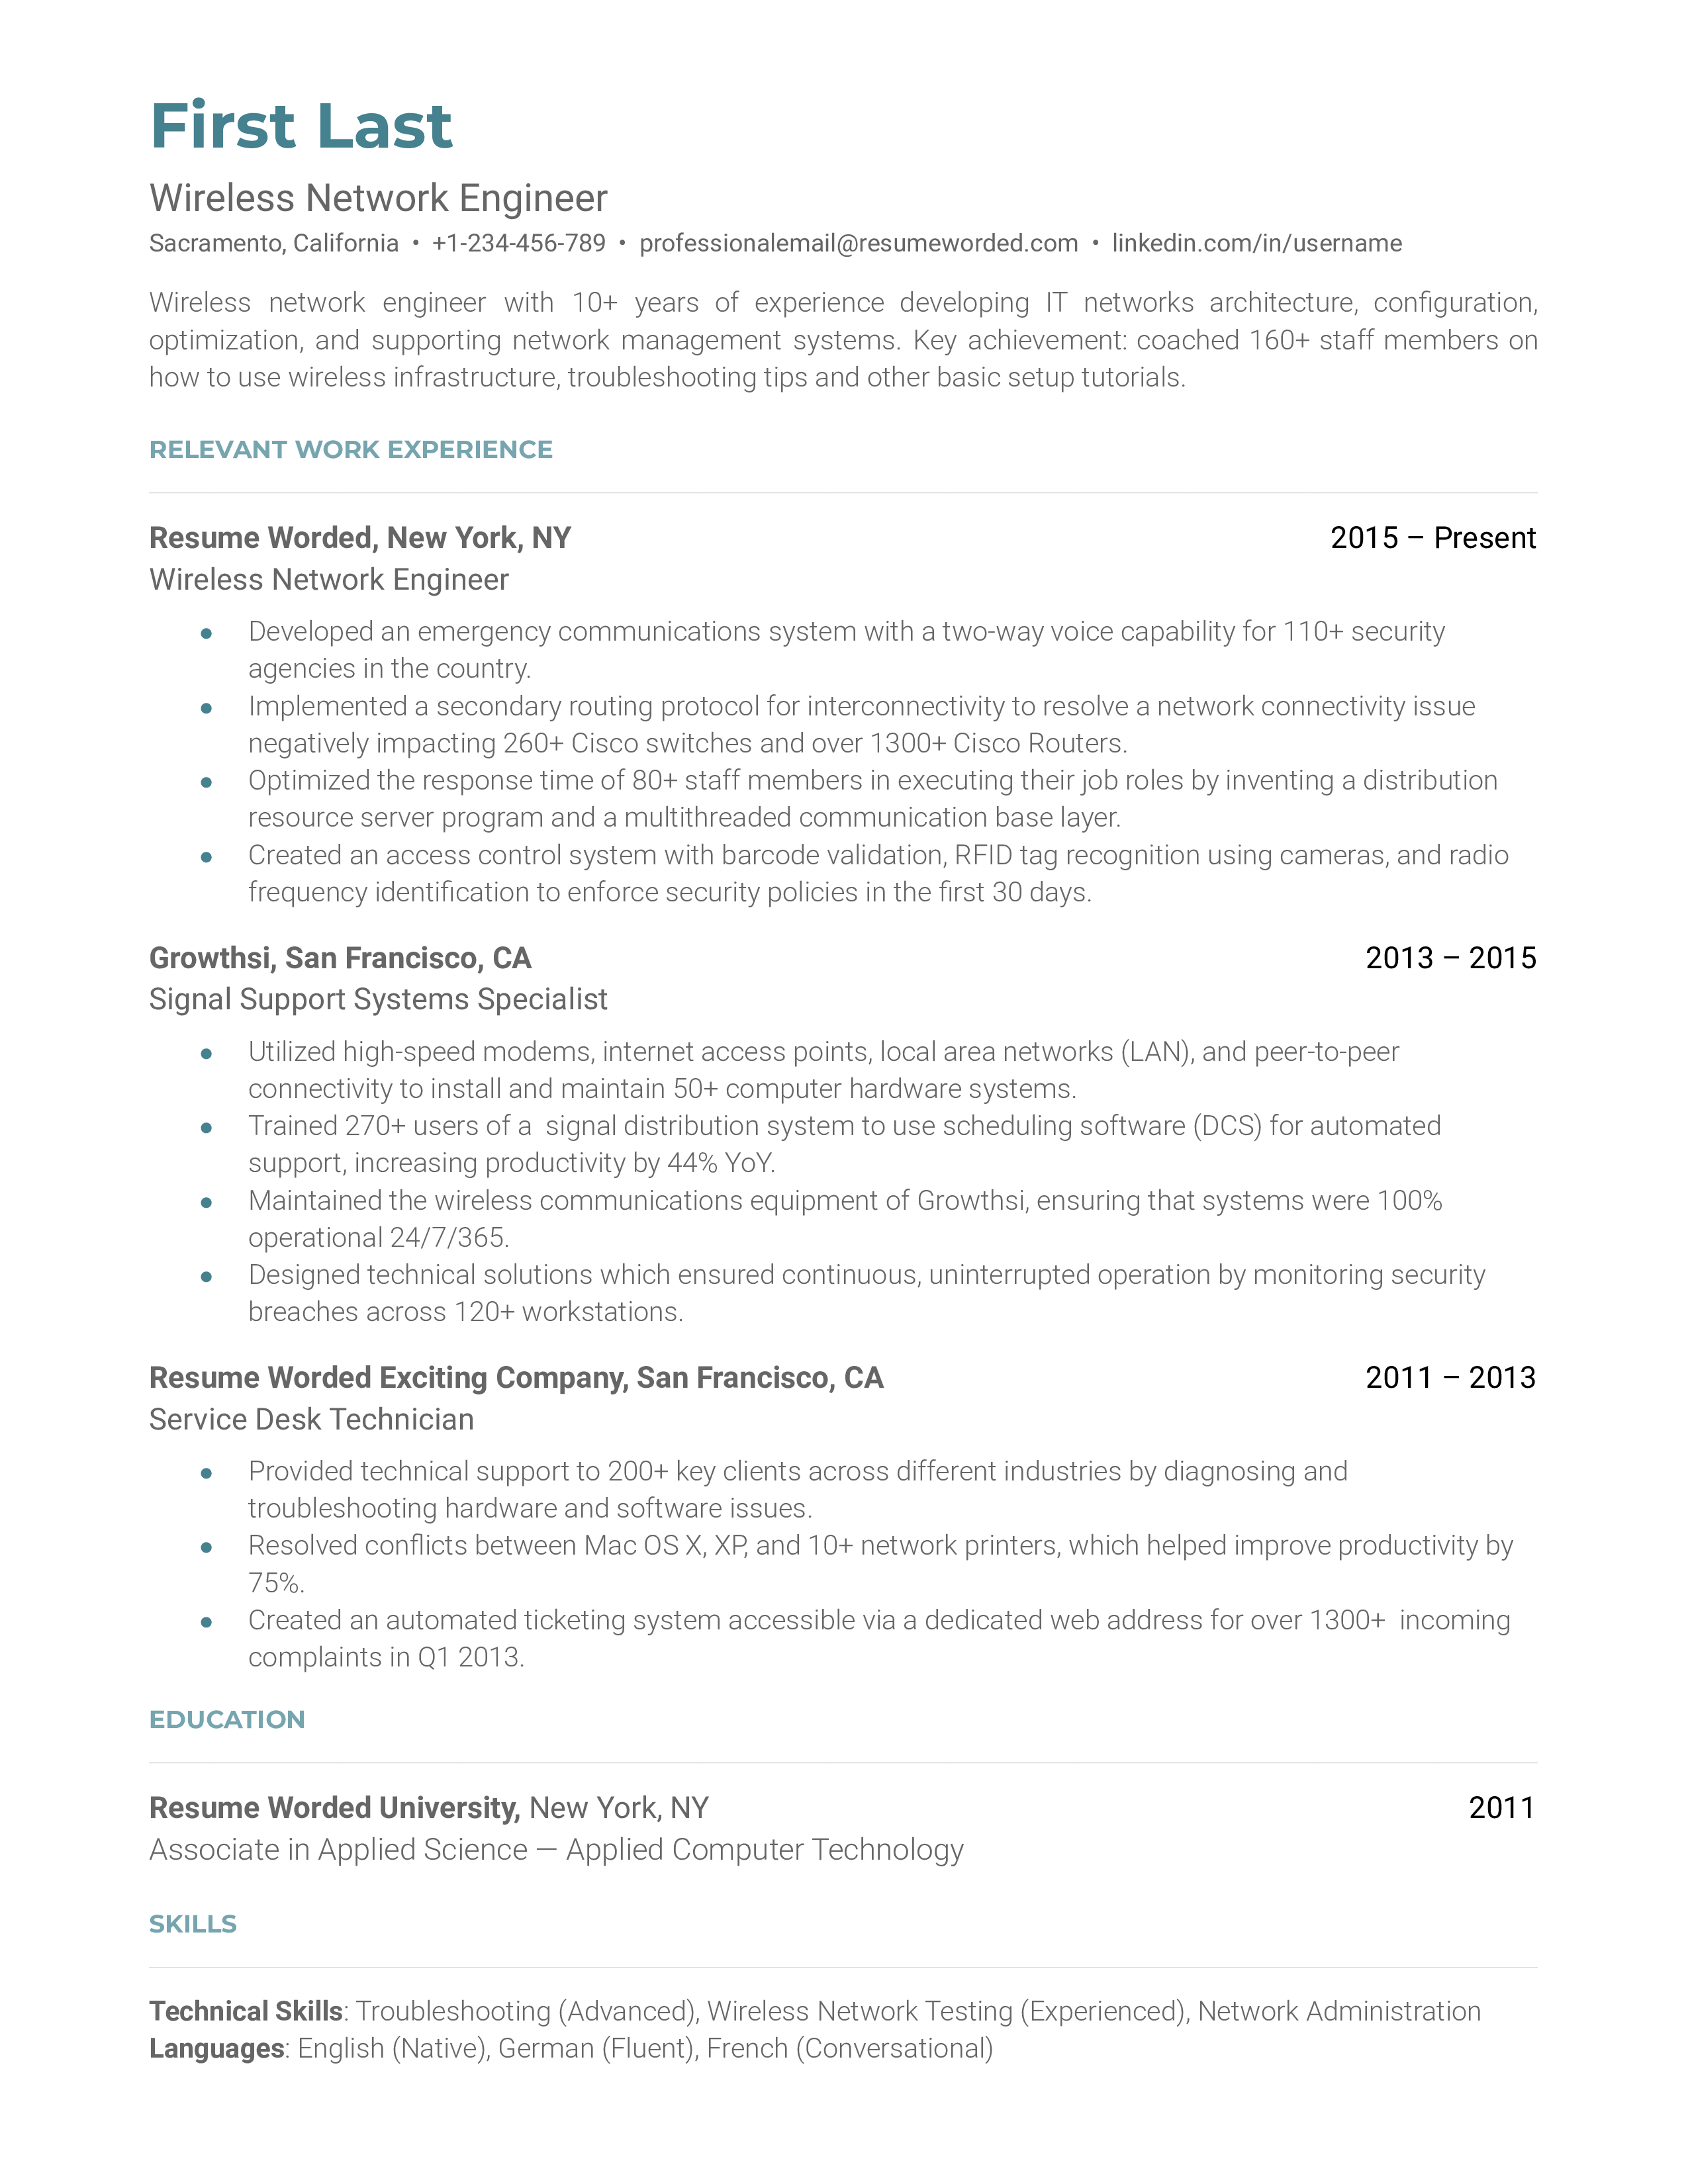 A wireless network engineer resume template focusing on technical skills.